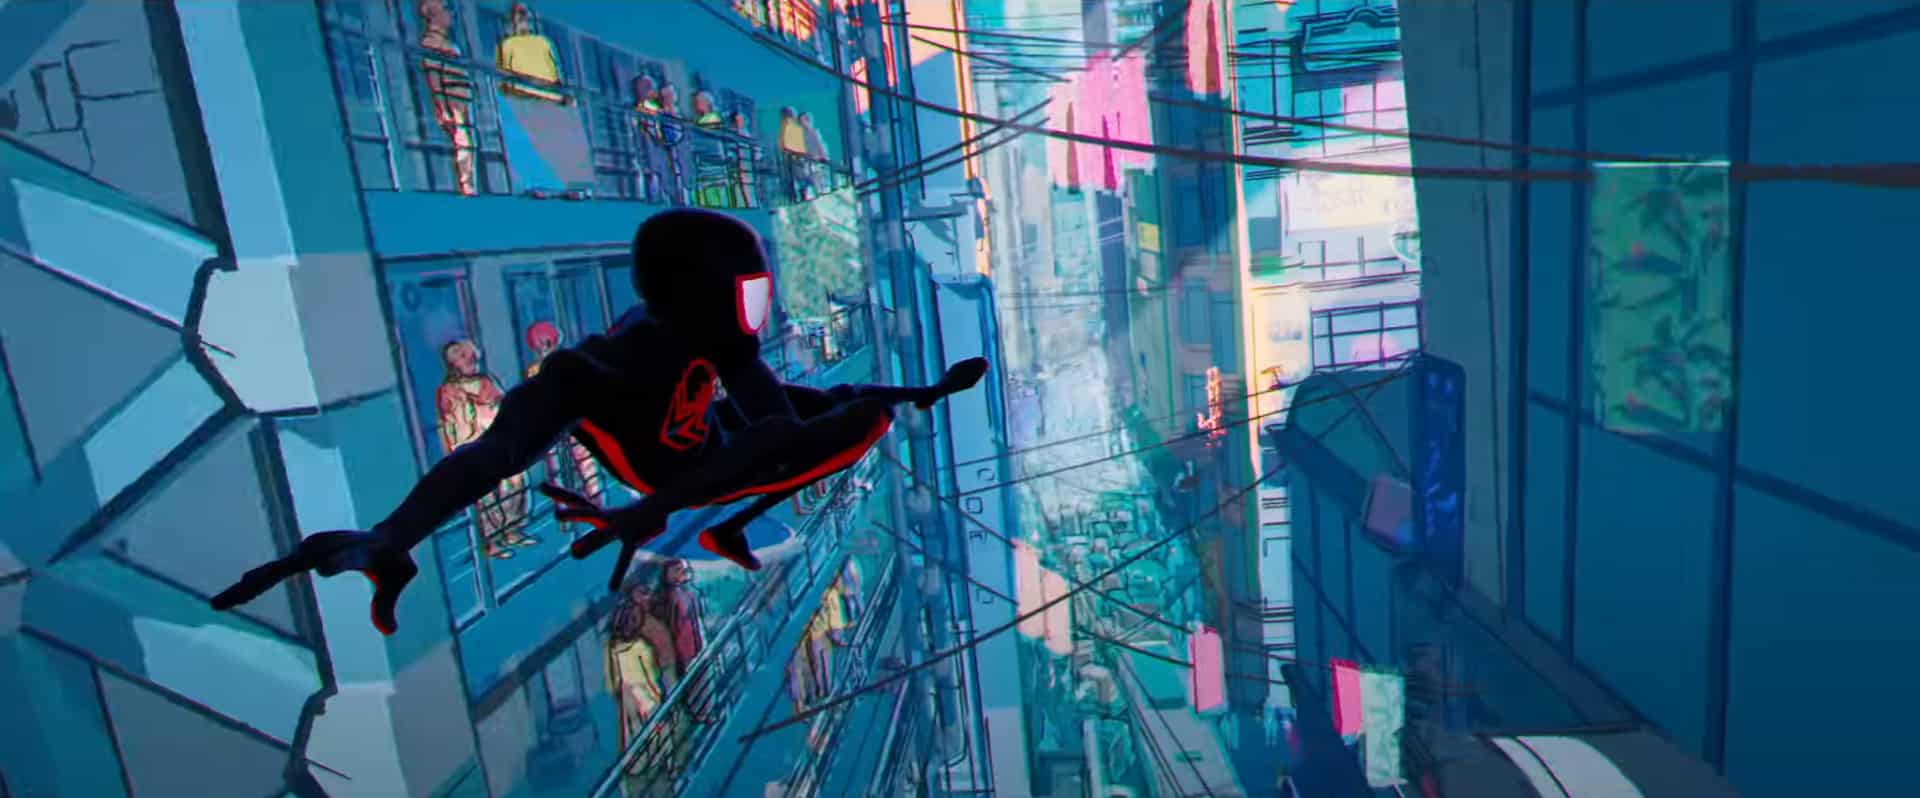 For continuity, the film embraces the comic style that defined Into the Spider-Verse but adopts a number of other art forms and sound that breathes life into the story, evoking emotion and engagement. Screenshot: Youtube/Sony Pictures